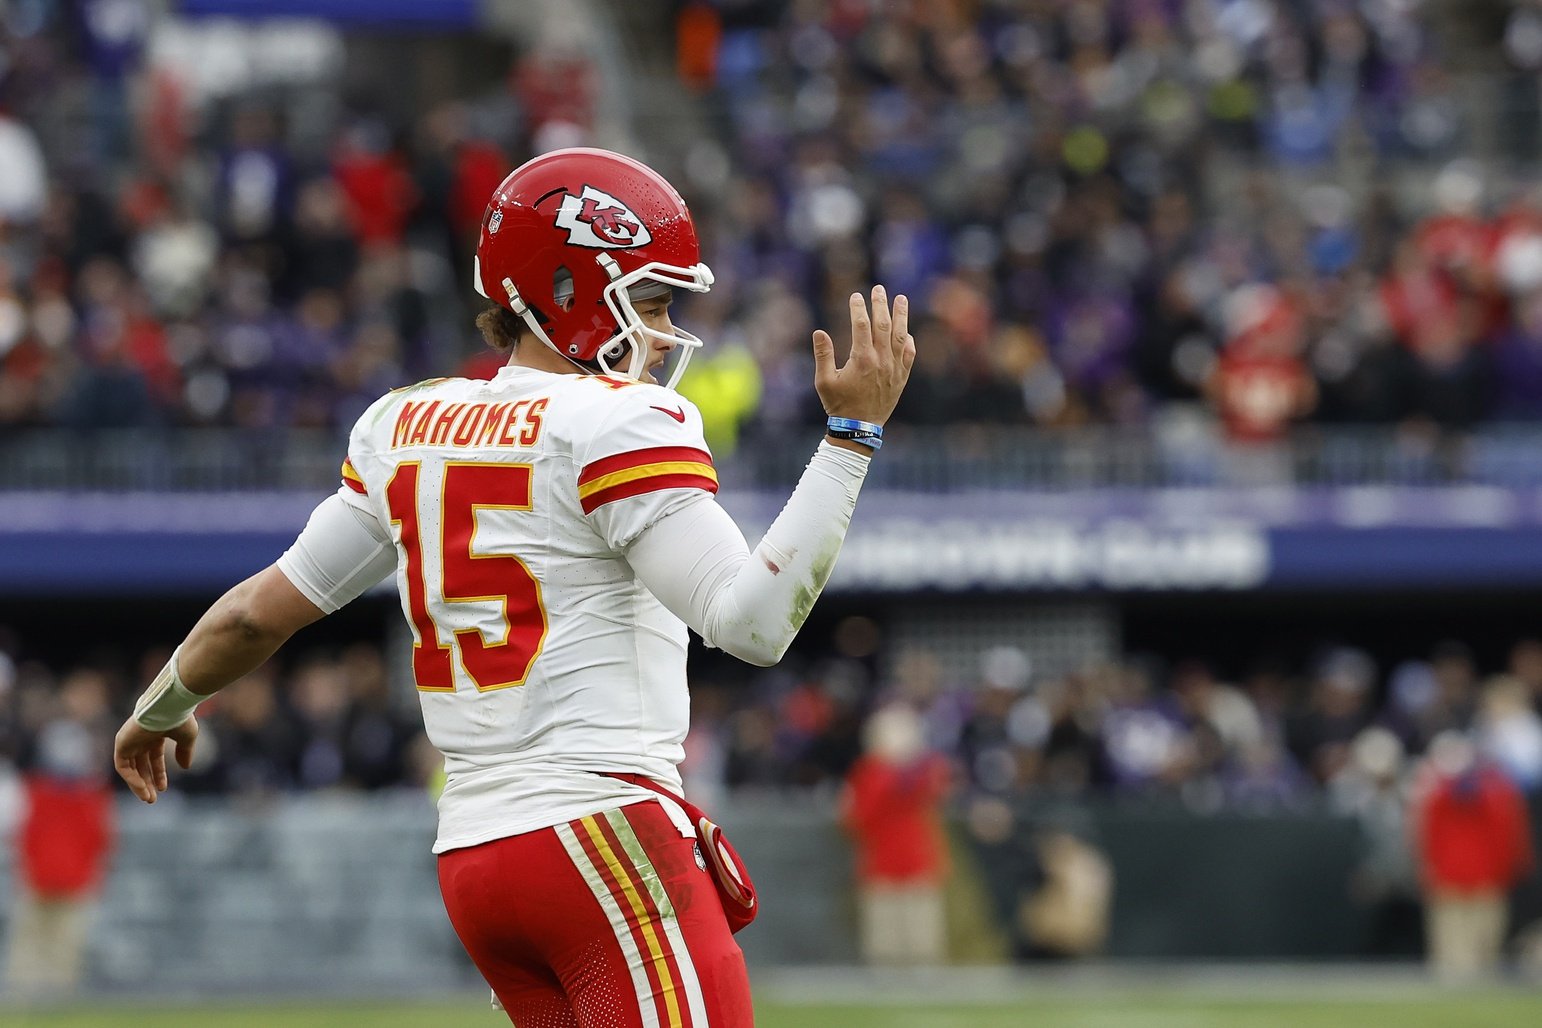 Kansas City Chiefs QB Patrick Mahomes (15) reacts on the field against the Baltimore Ravens.